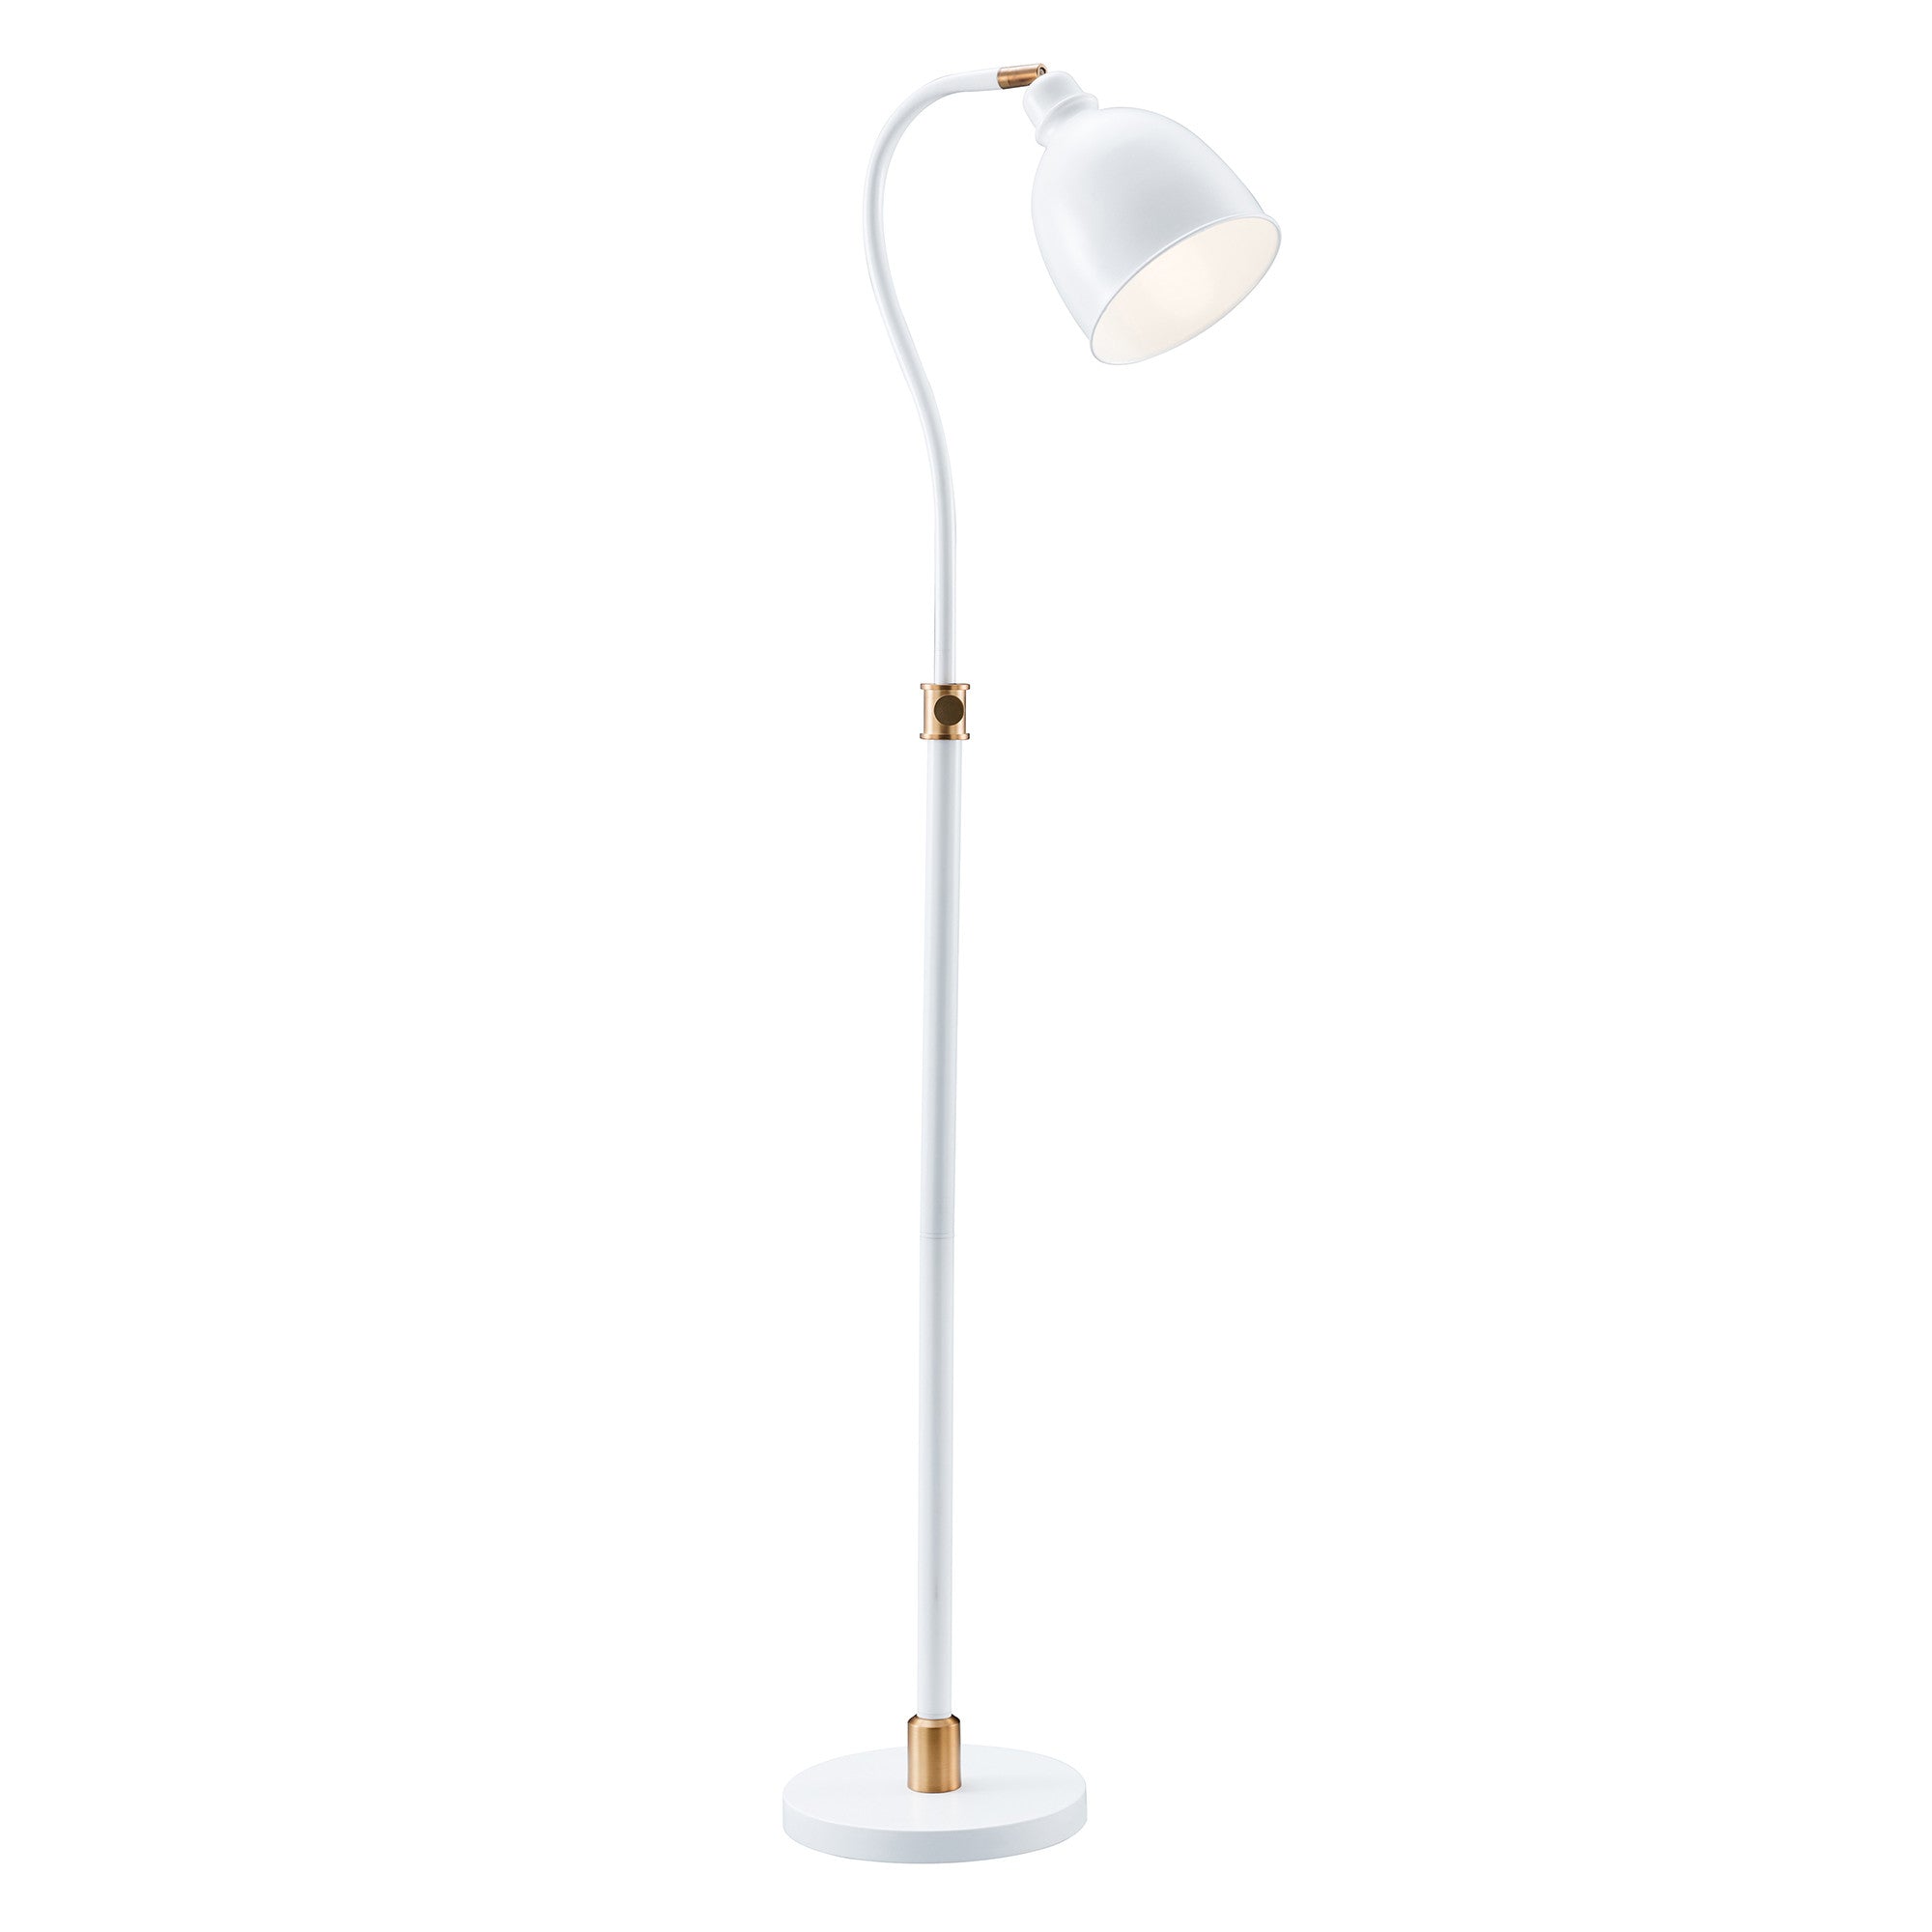 68" Brass Adjustable Reading Floor Lamp With White Frosted Glass Dome Shade